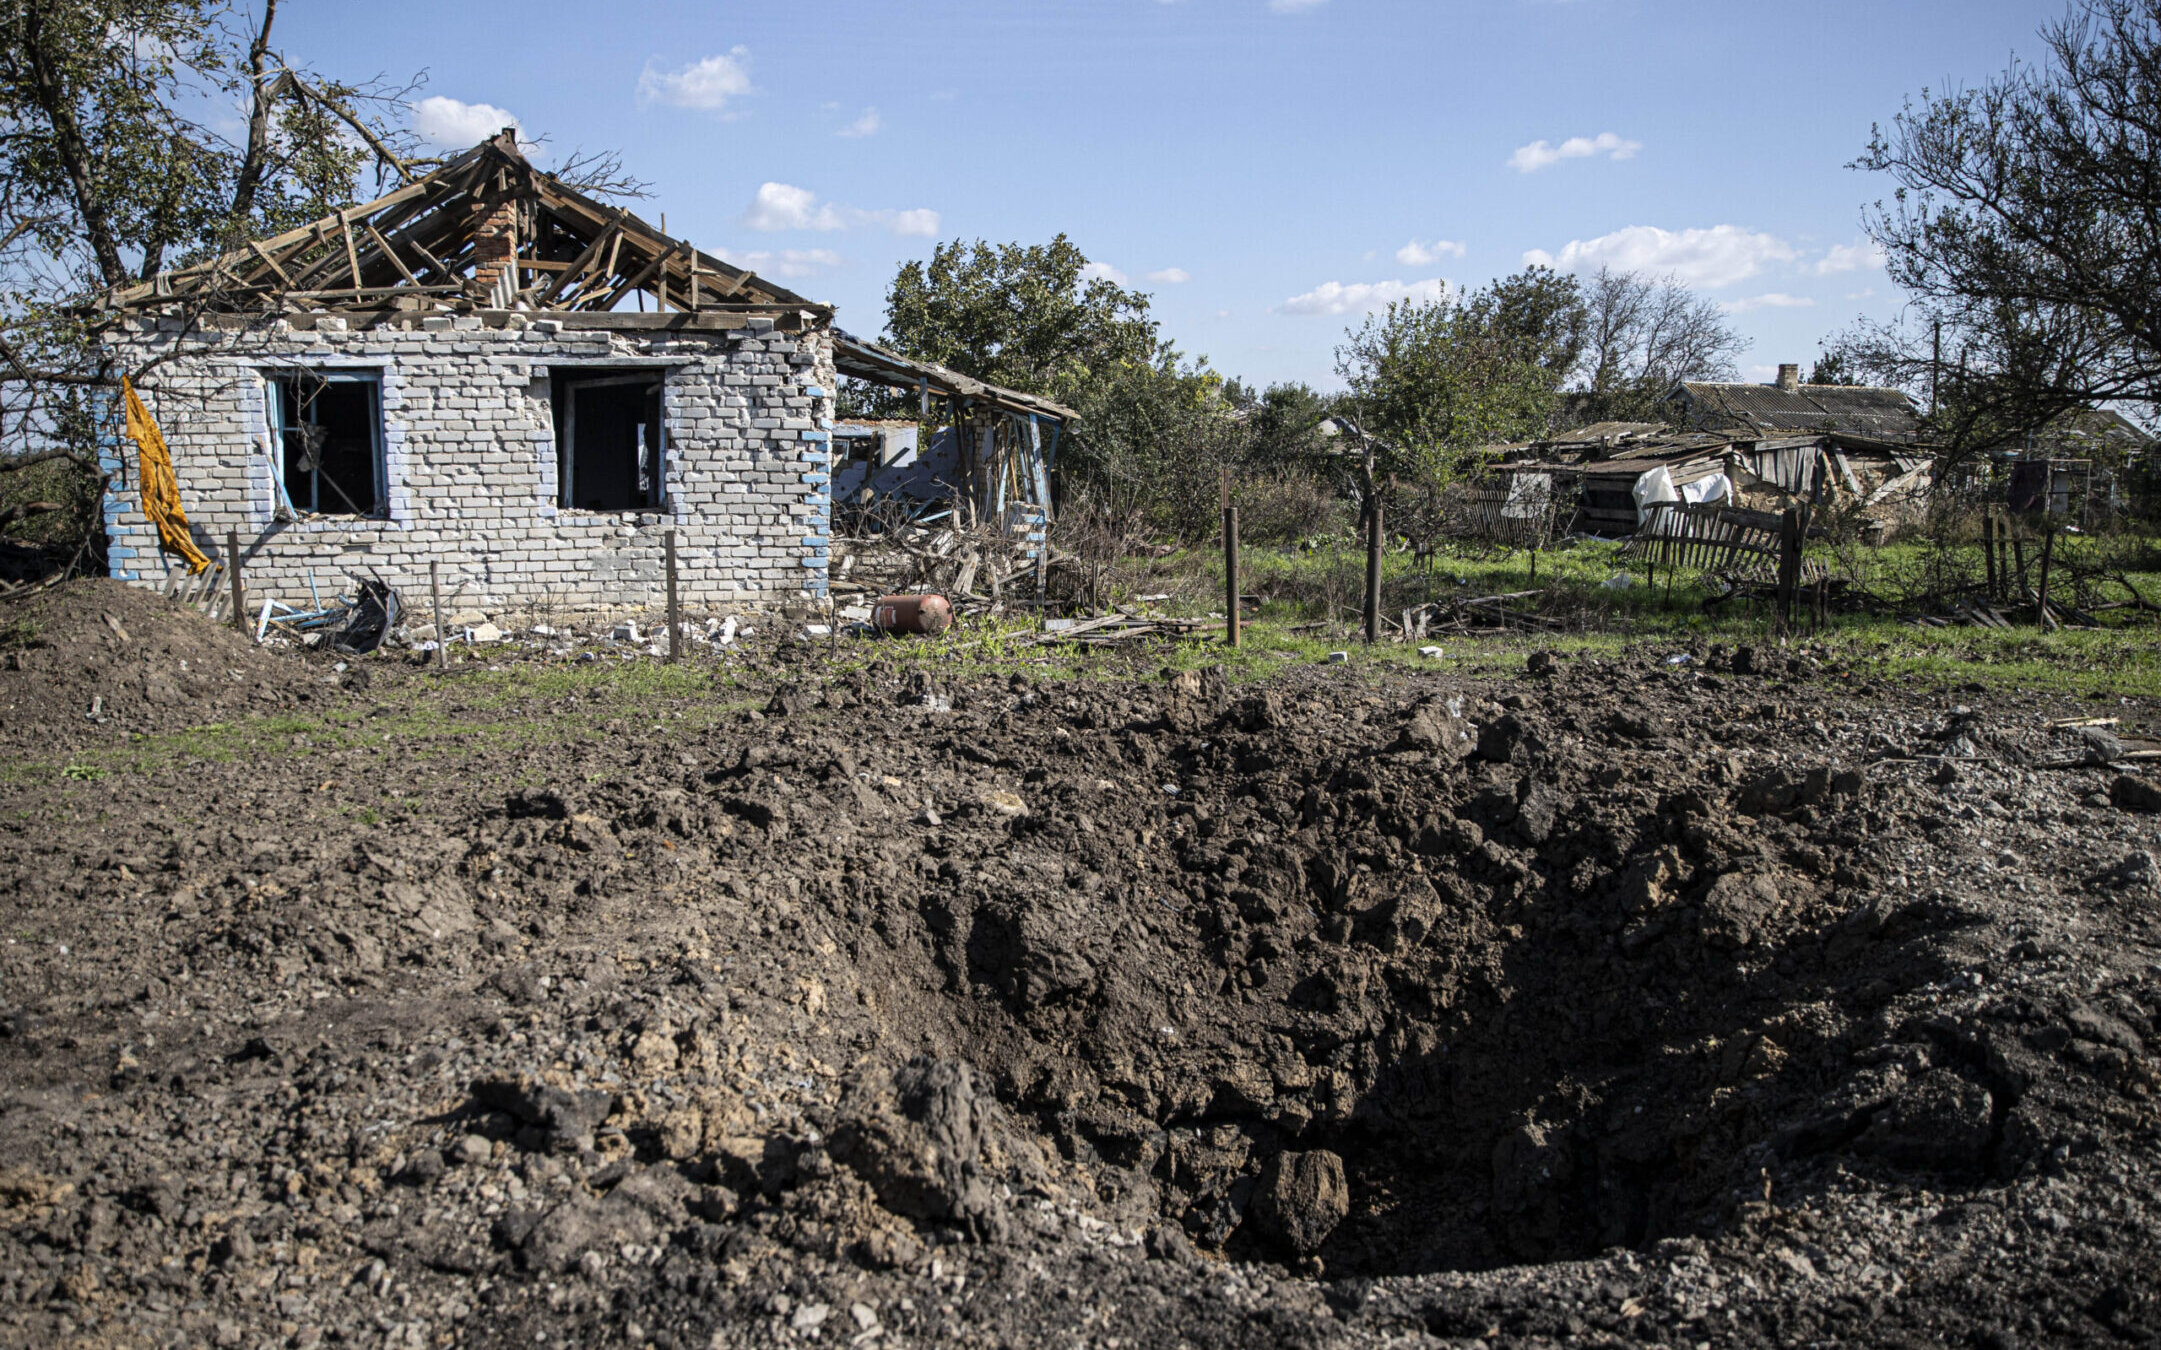 A view of a damaged village located in the border of the Kherson region where Ukraine and Russia have traded control amid heavy clashes, Oct. 7, 2022.(Metin Aktas/Anadolu Agency via Getty Images)